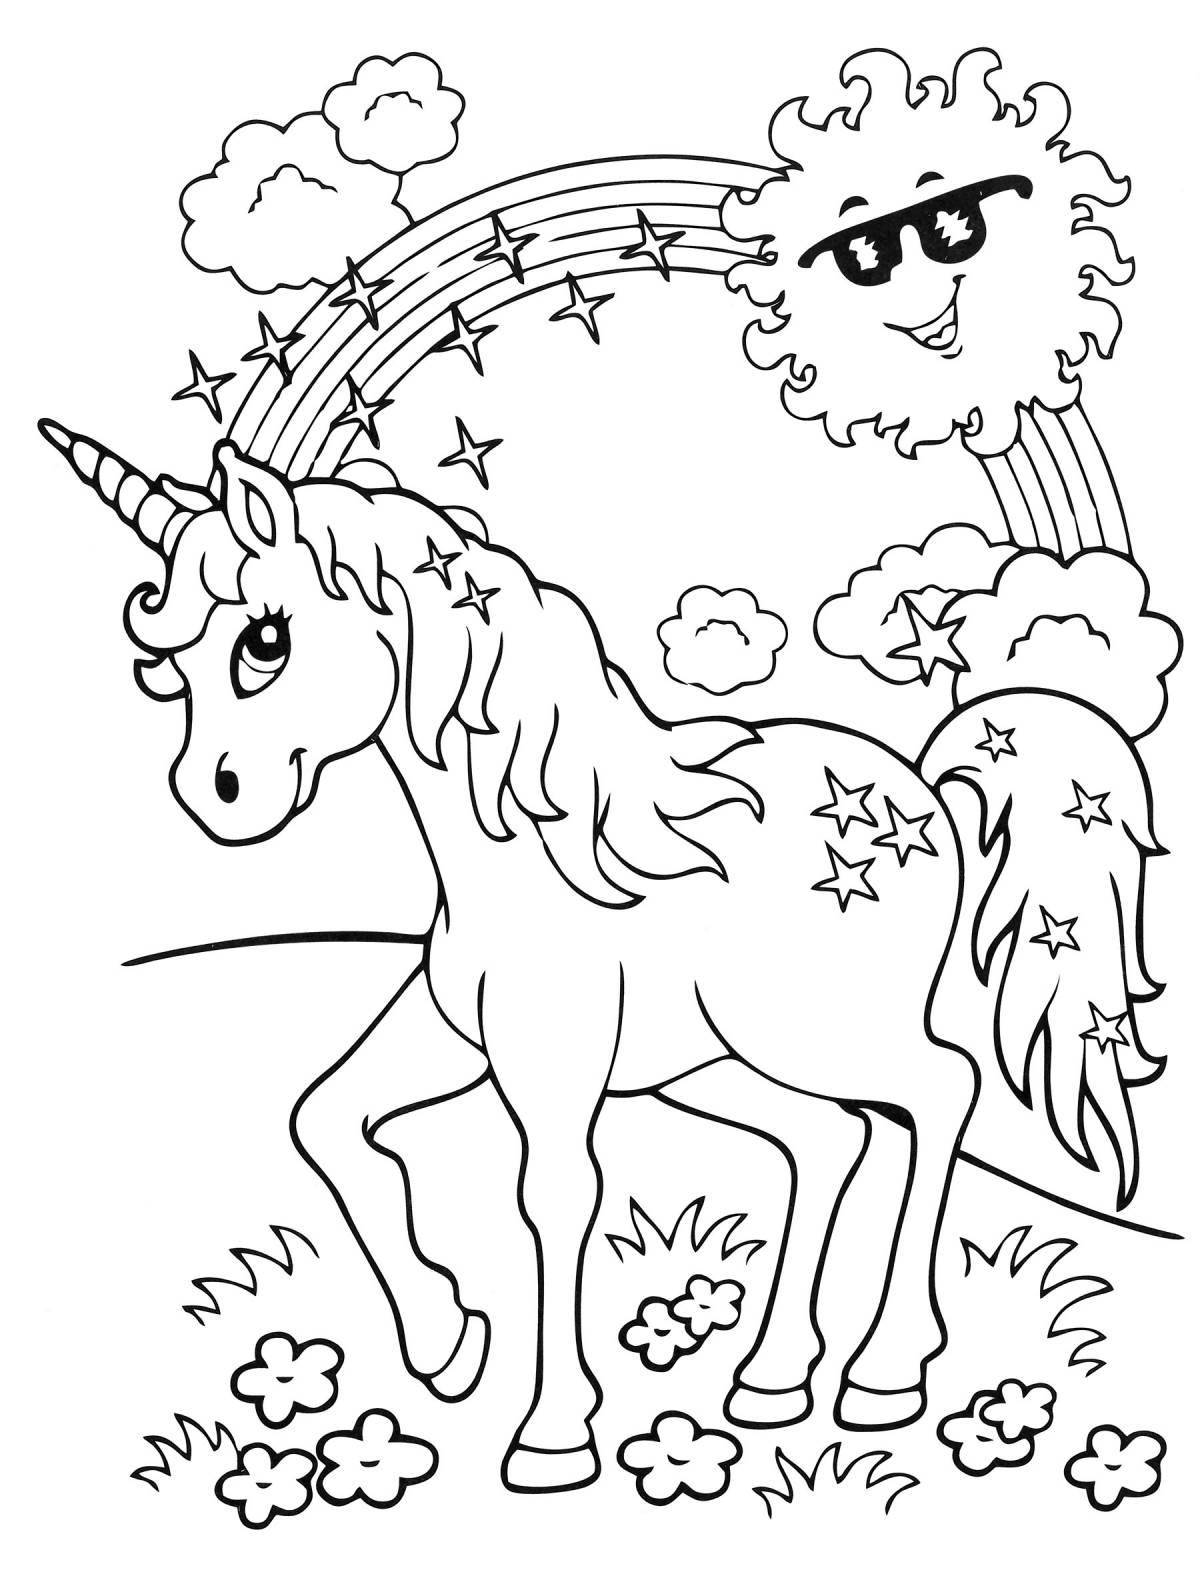 Awesome unicorn coloring book